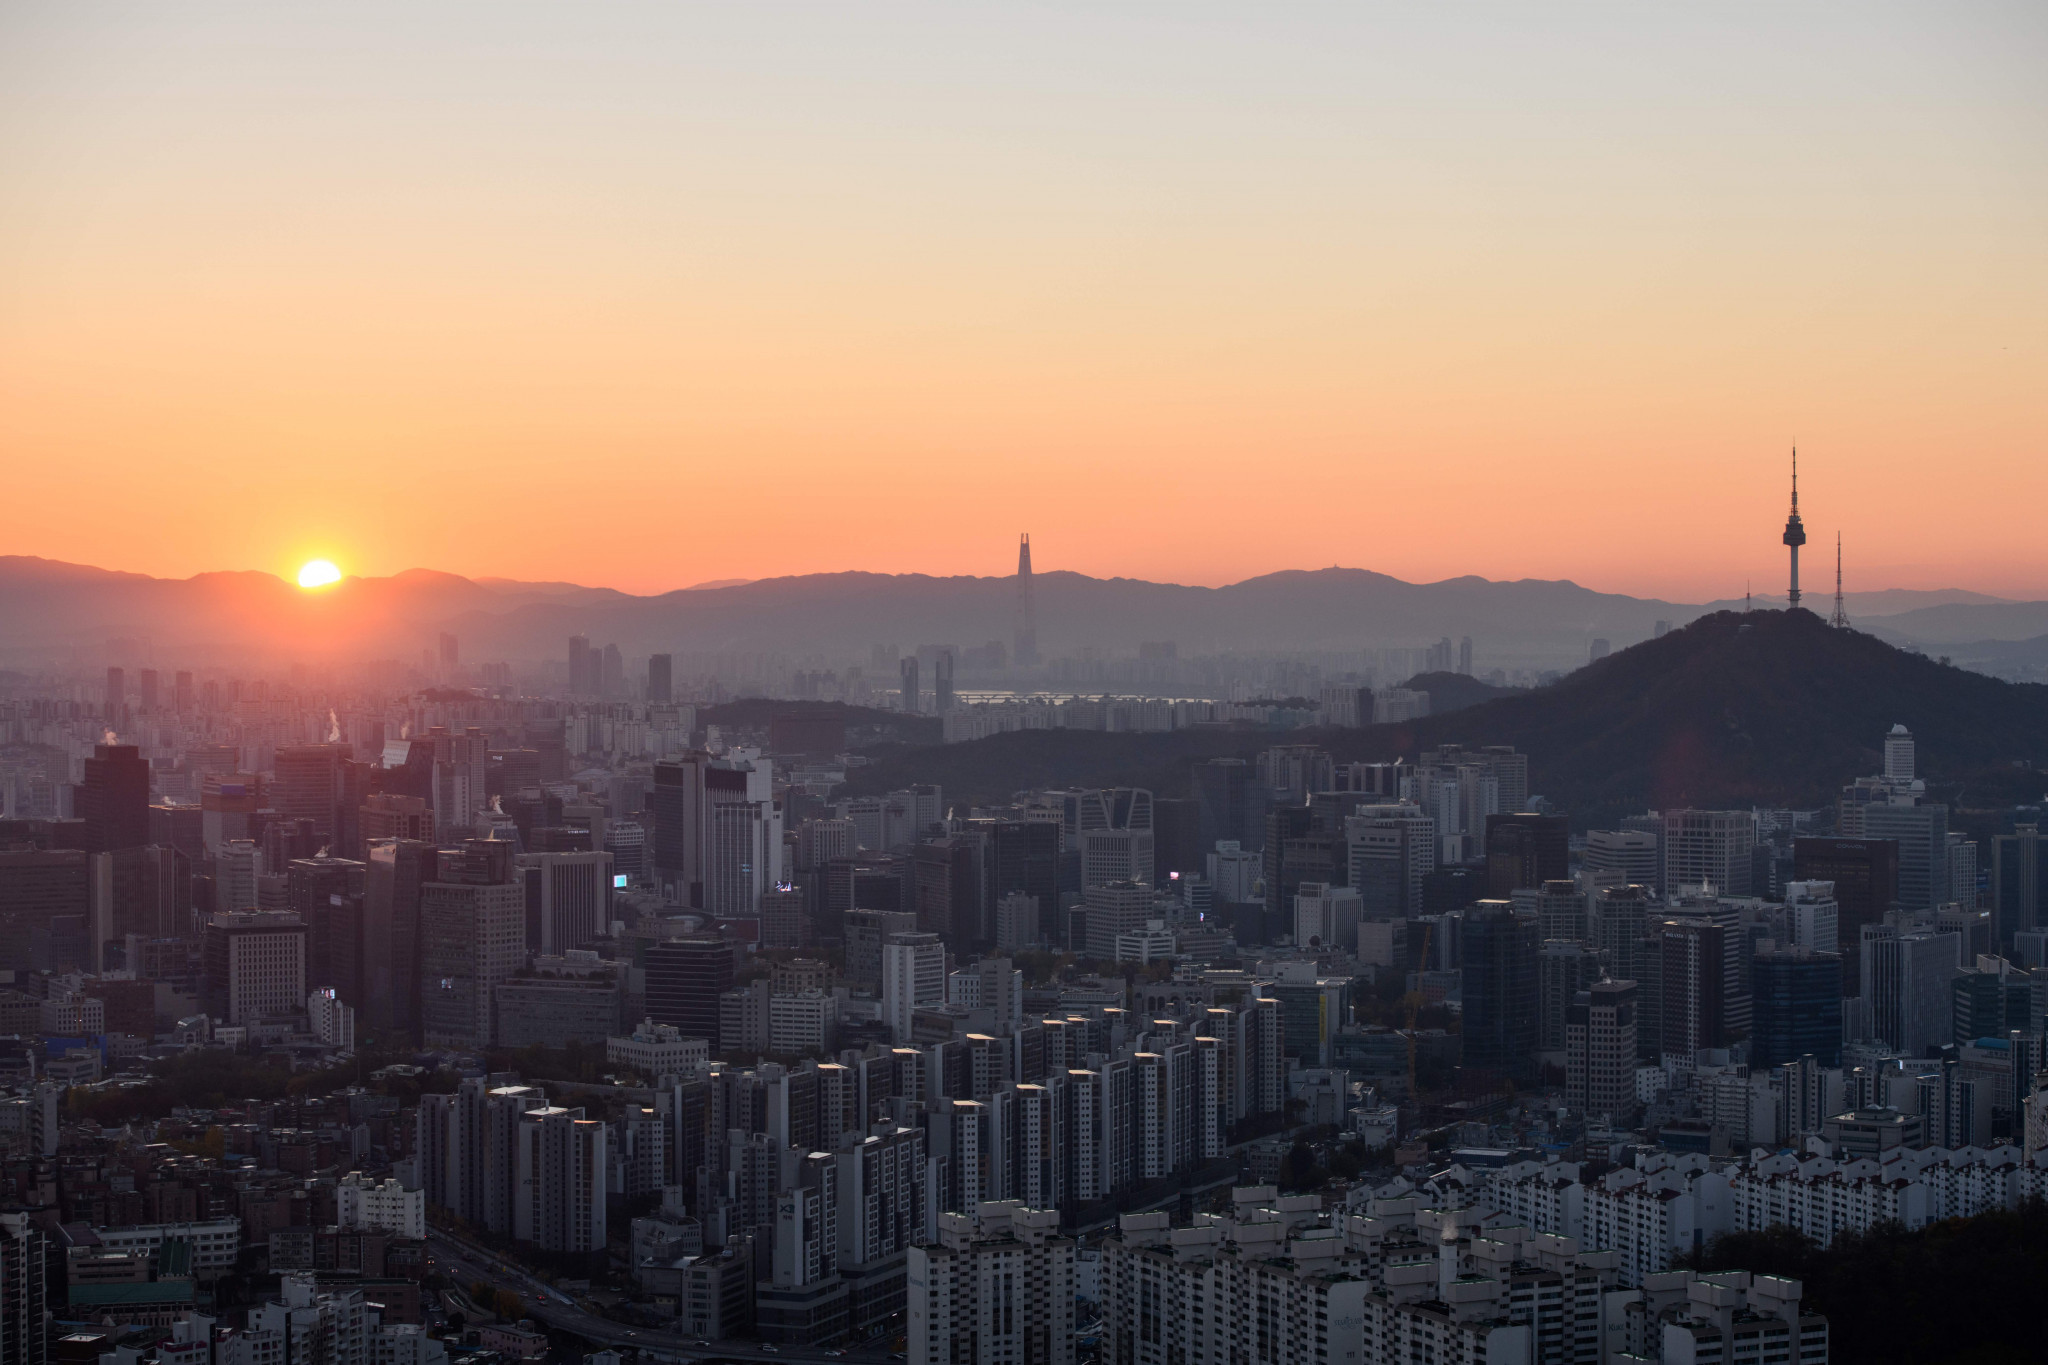 Seoul has been selected as the South Korean candidate for the joint 2032 bid with North Korea ©Getty Images